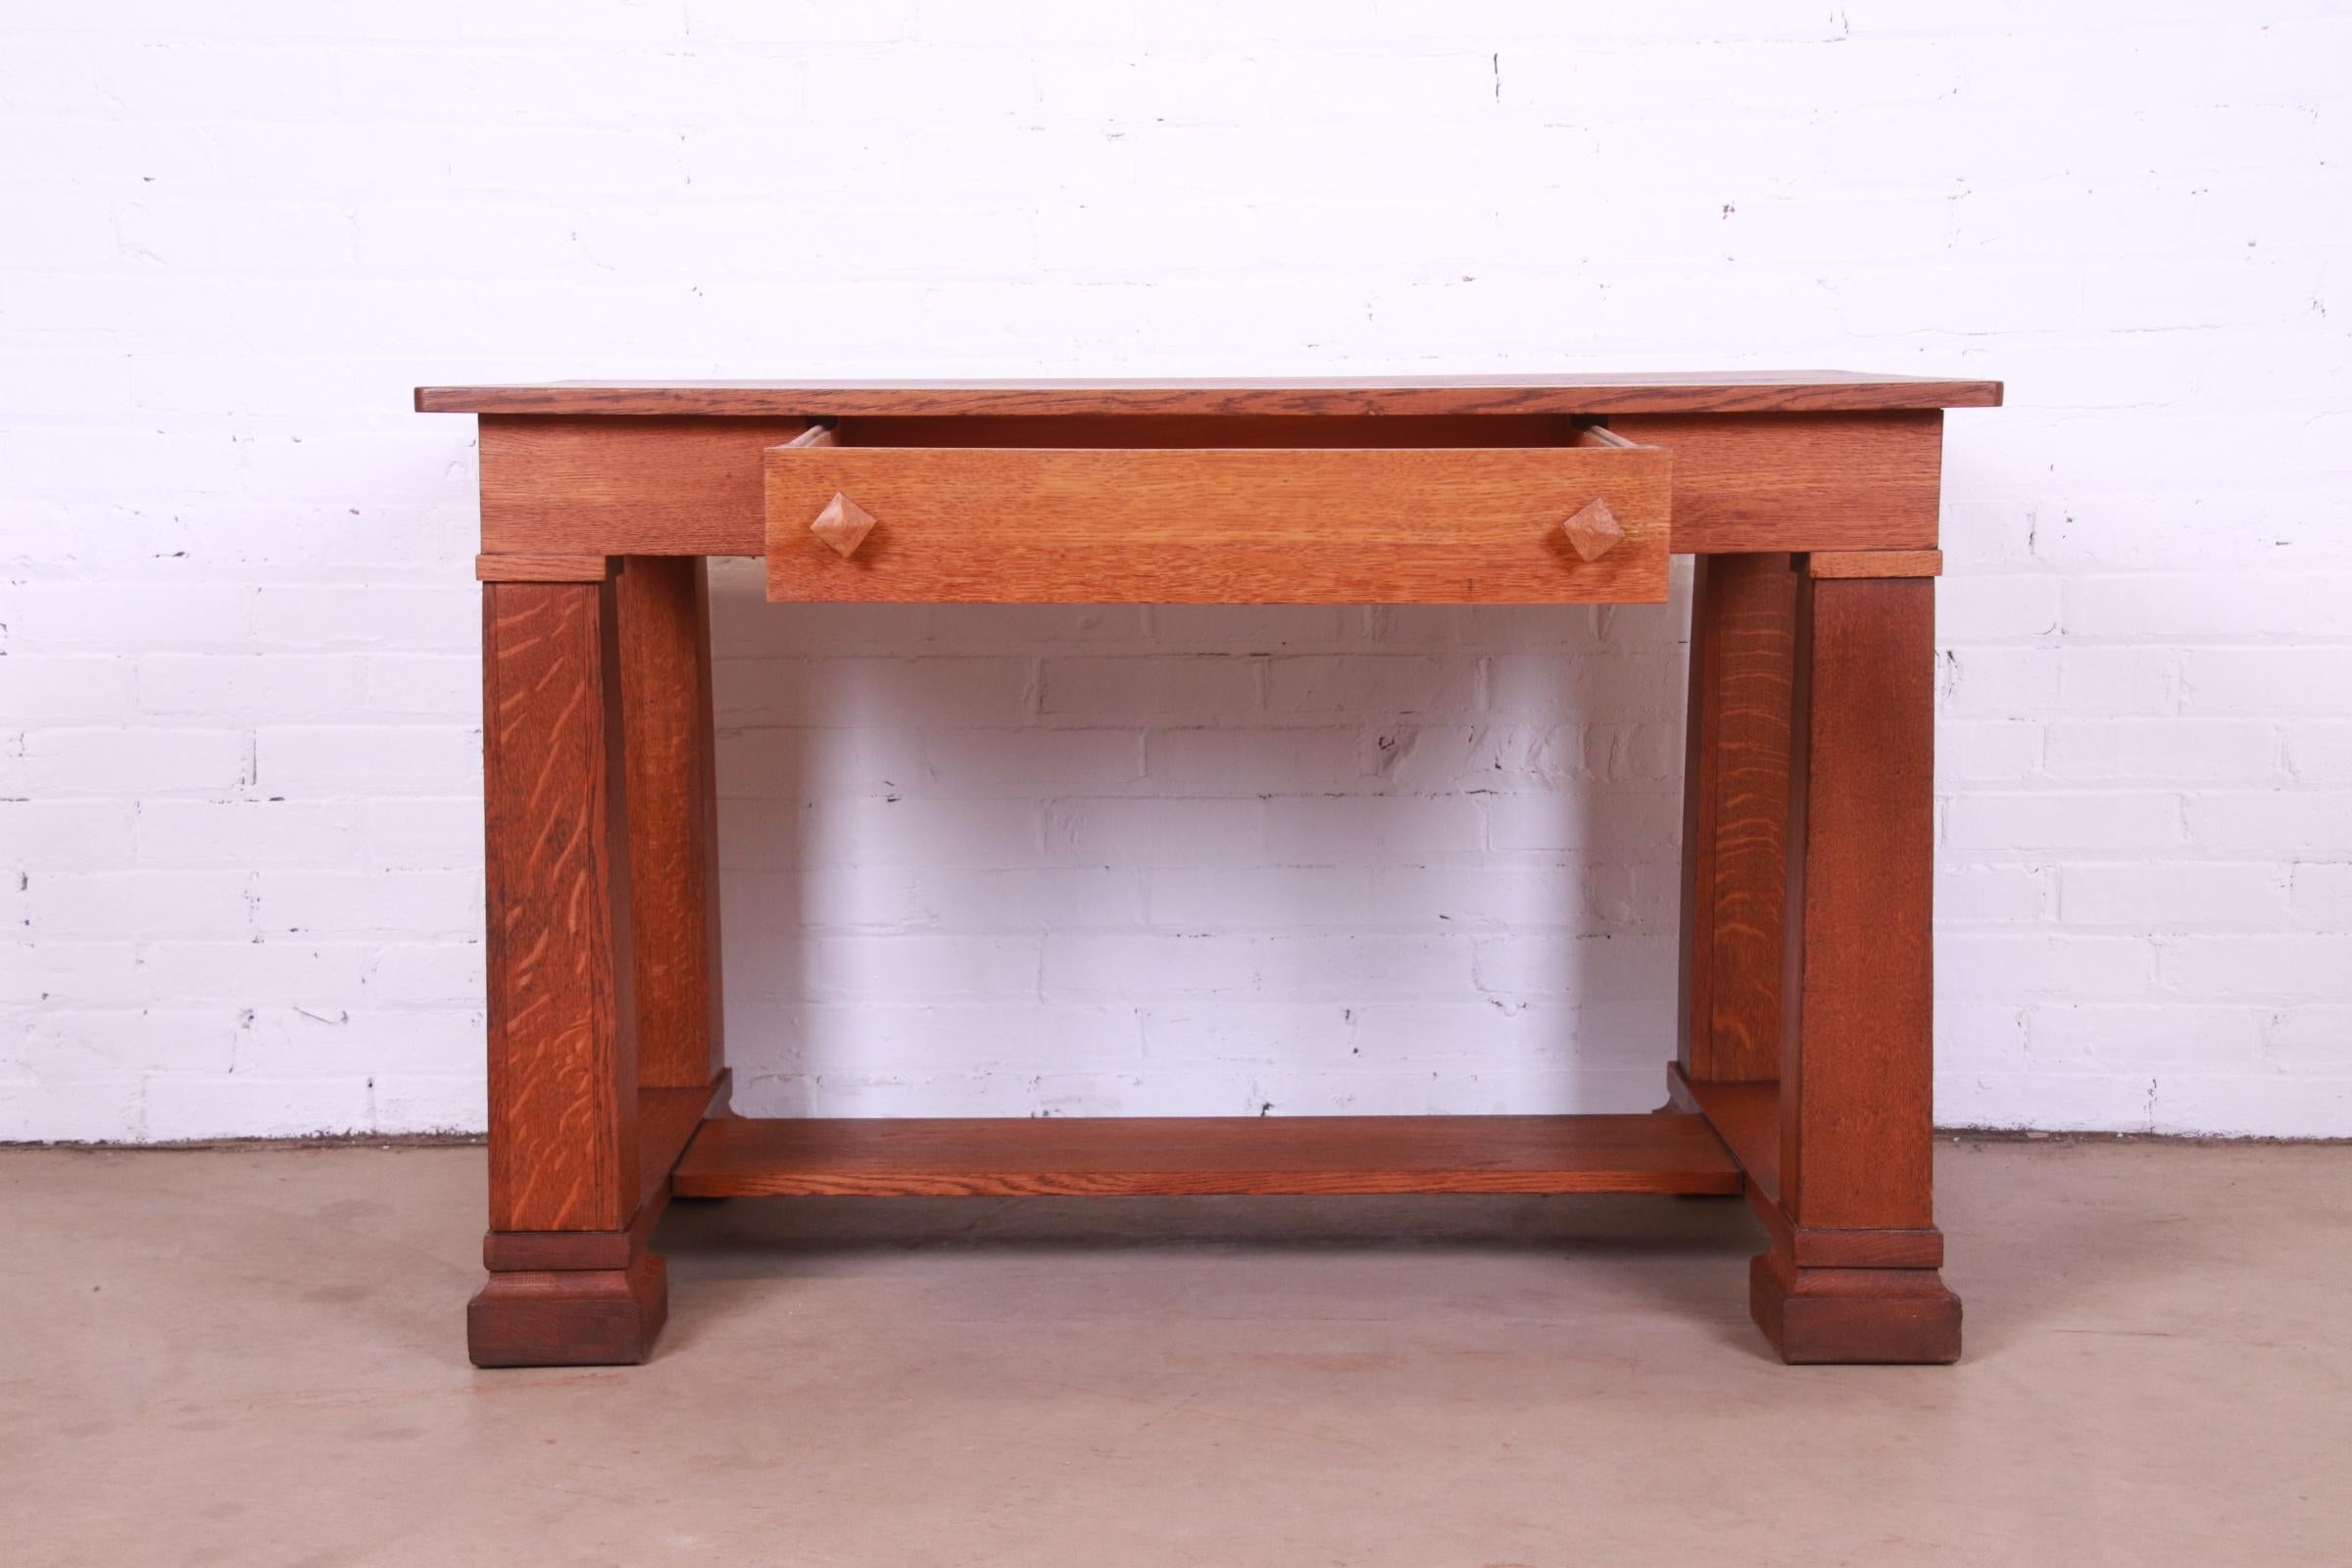 20th Century Antique Mission Oak Arts & Crafts Writing Desk or Library Table, circa 1900